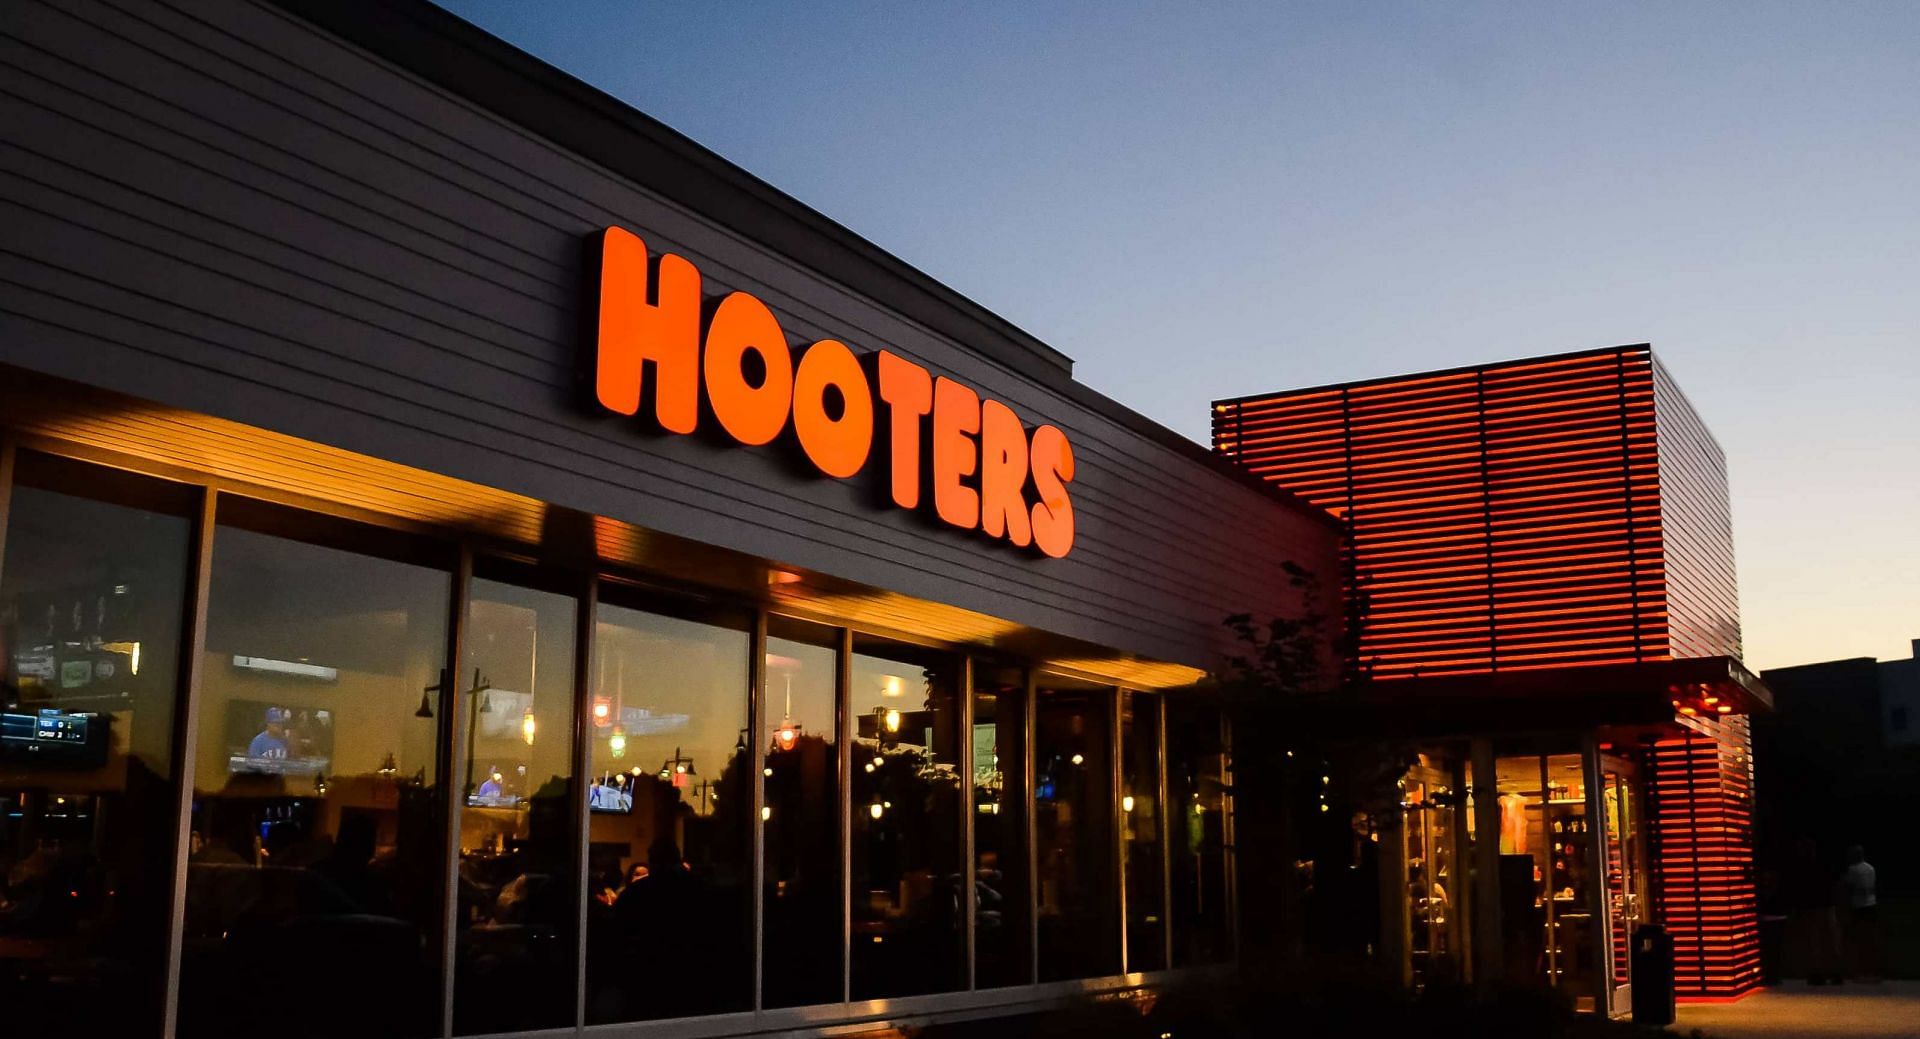 Hooters has landed in hot waters after launching new uniforms for female employees (Image via Hooters)